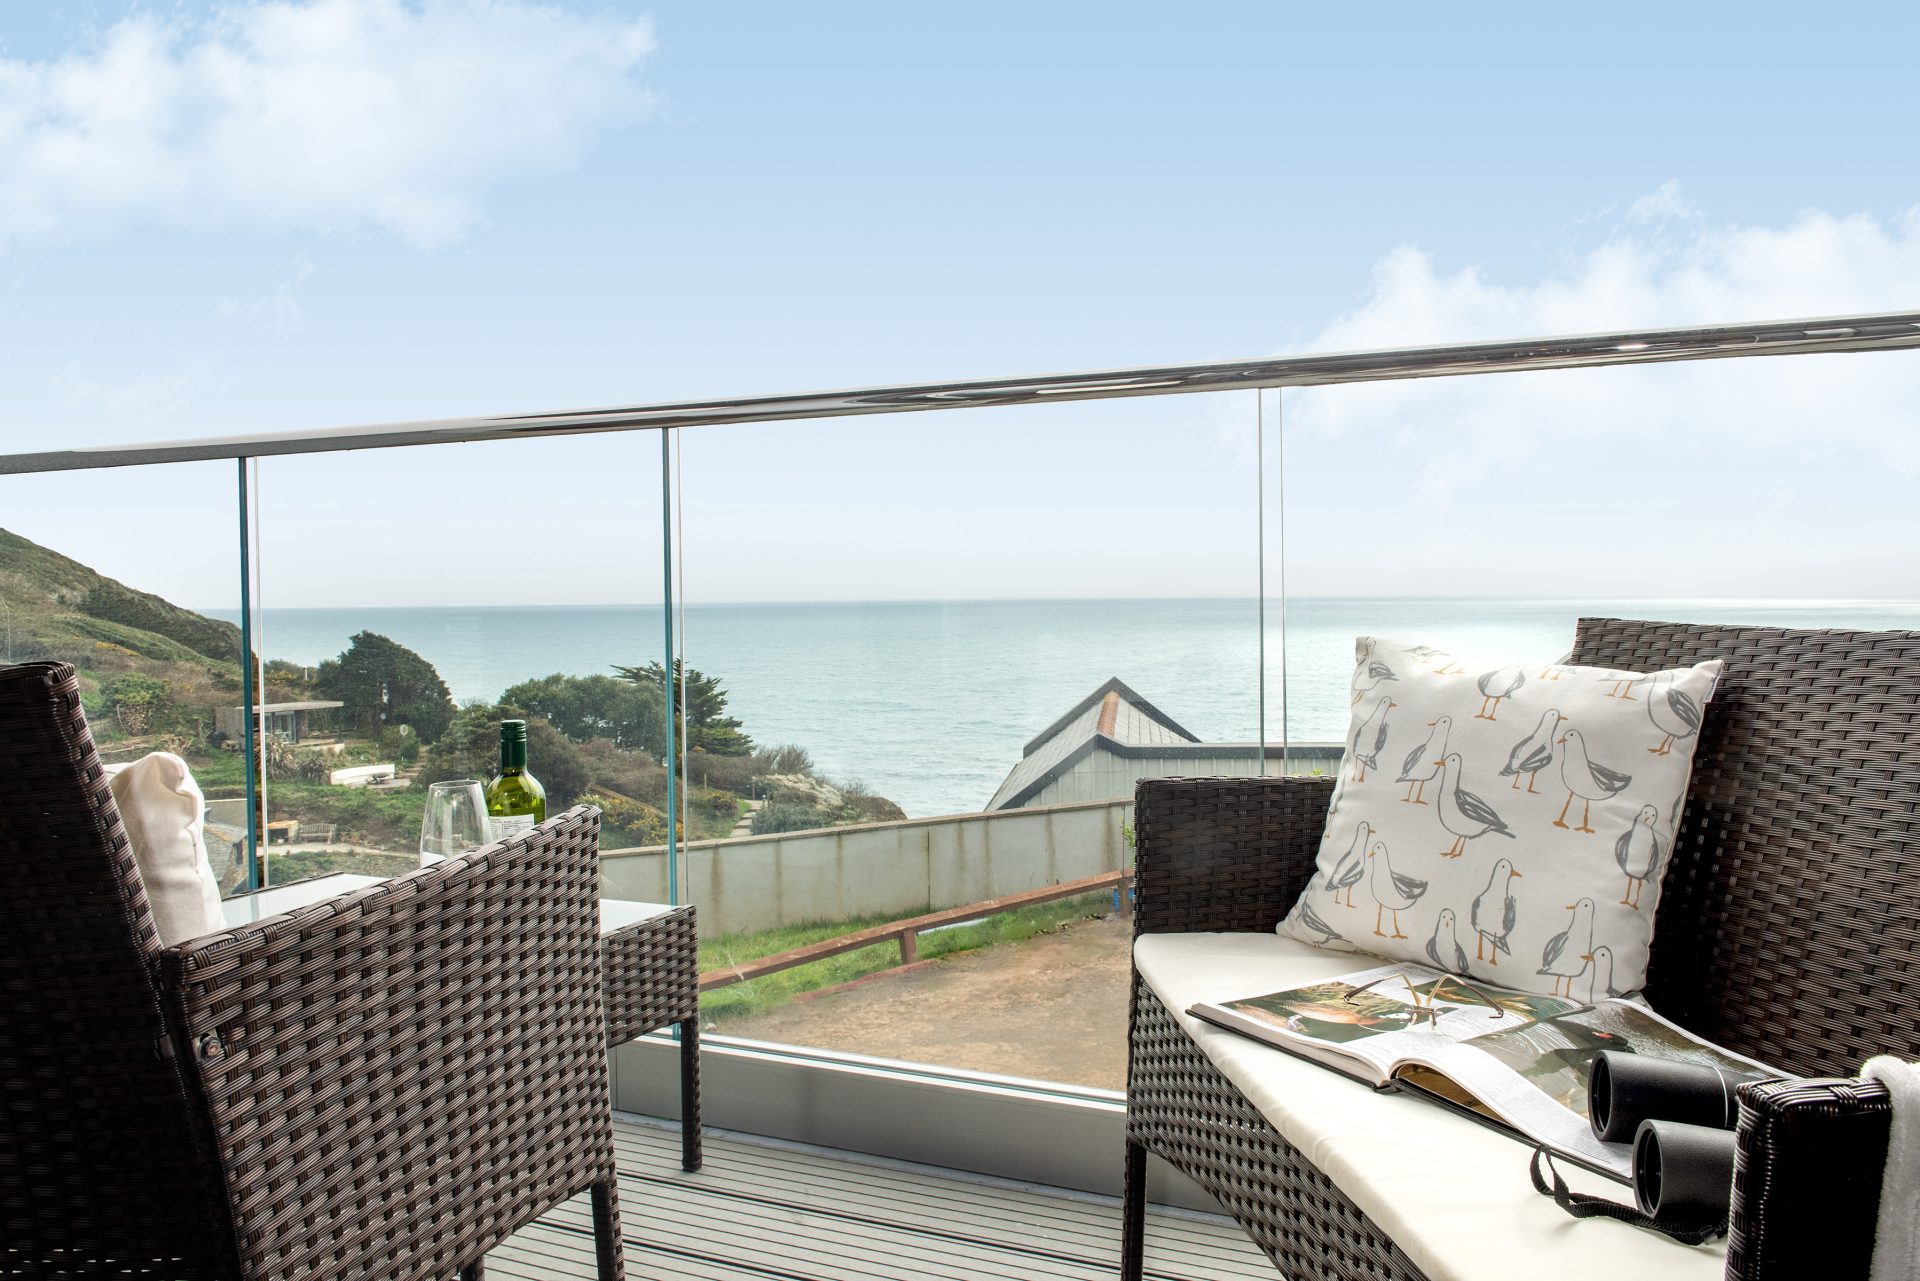 Low angled view from balcony overlooking the sea, with seating either side of balcony